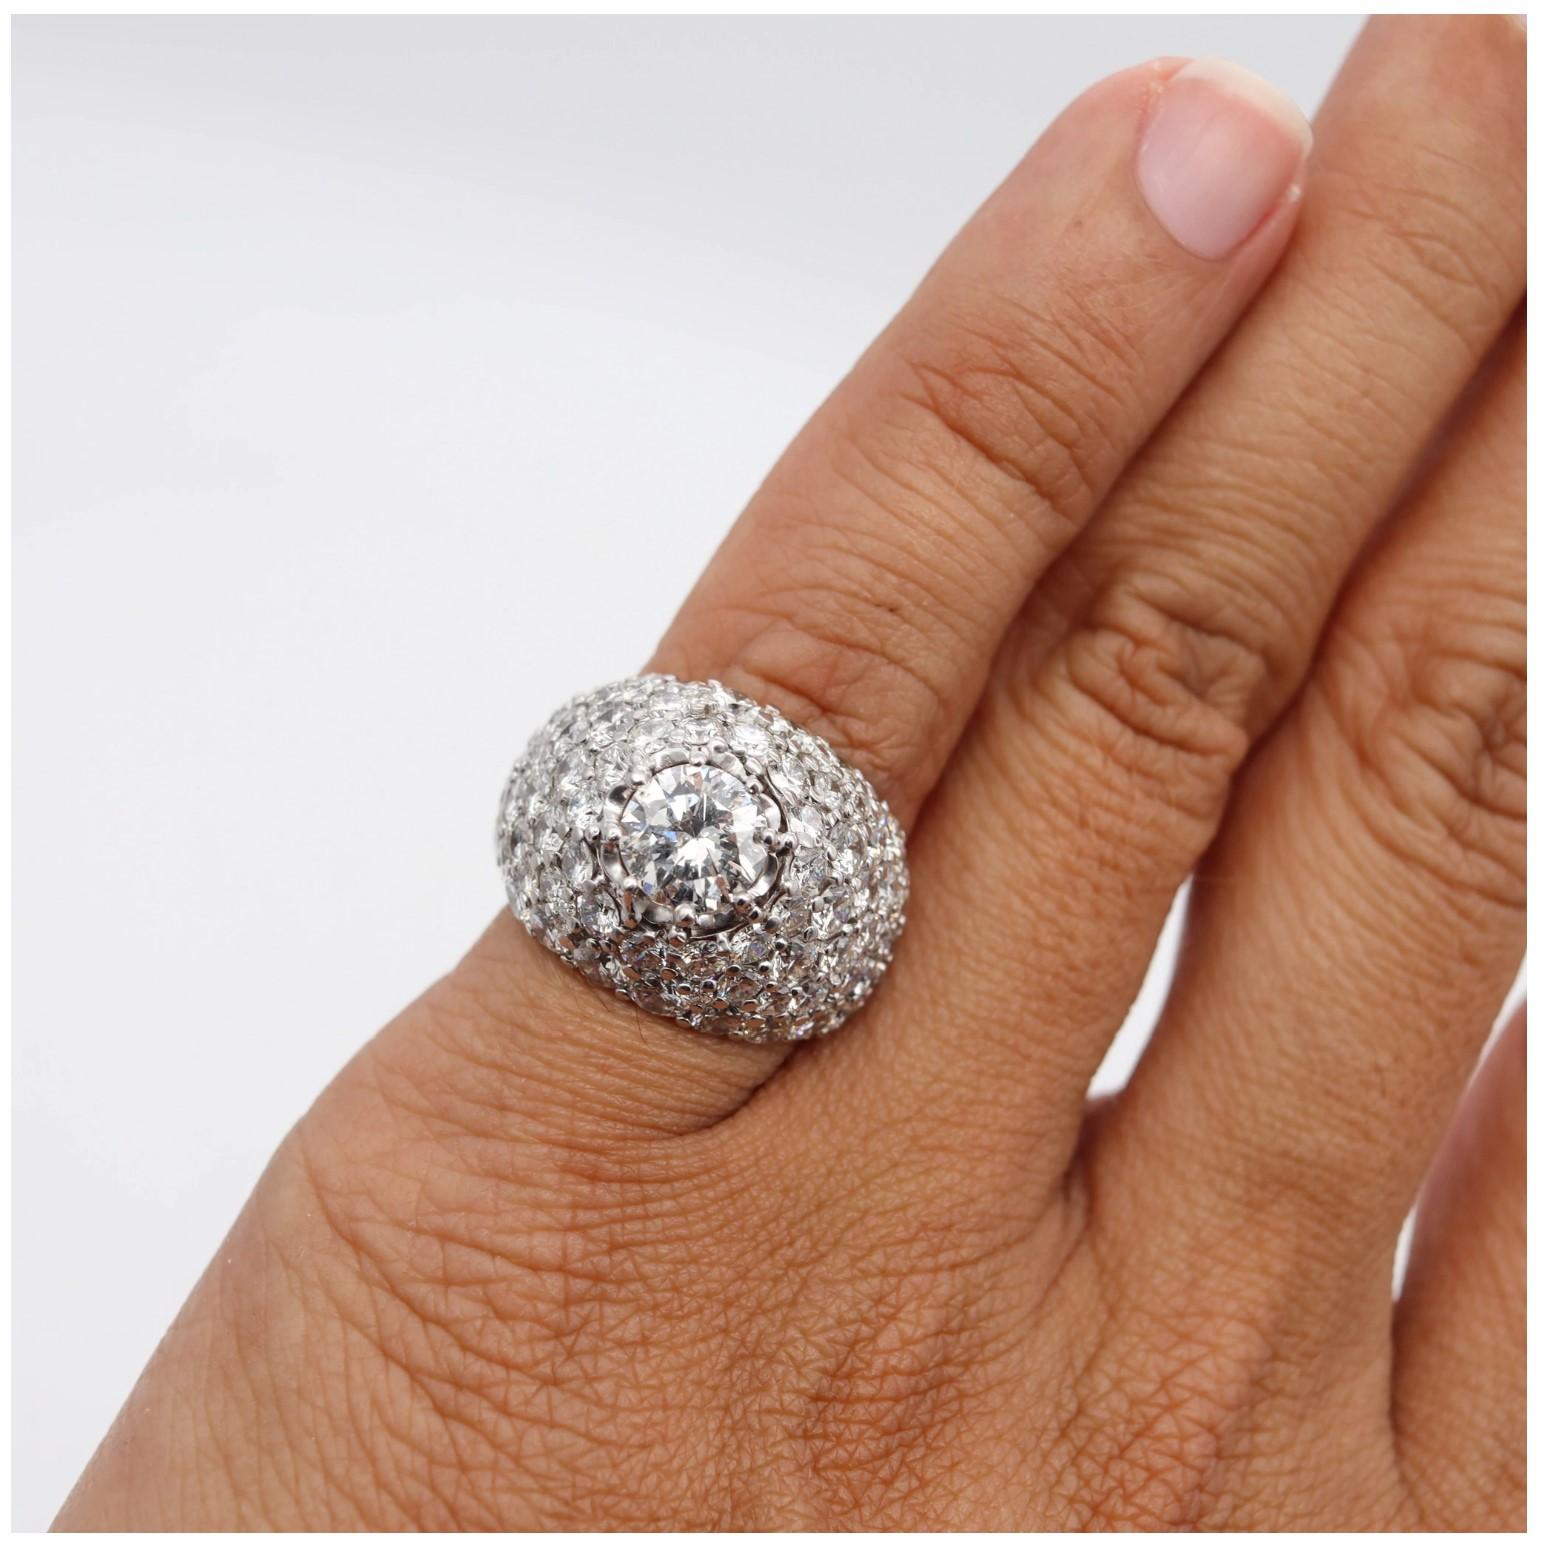 Yanes Exceptional Platinum Cluster Cocktail Ring Gia Certified 10.16 Ctw Diamond For Sale 6